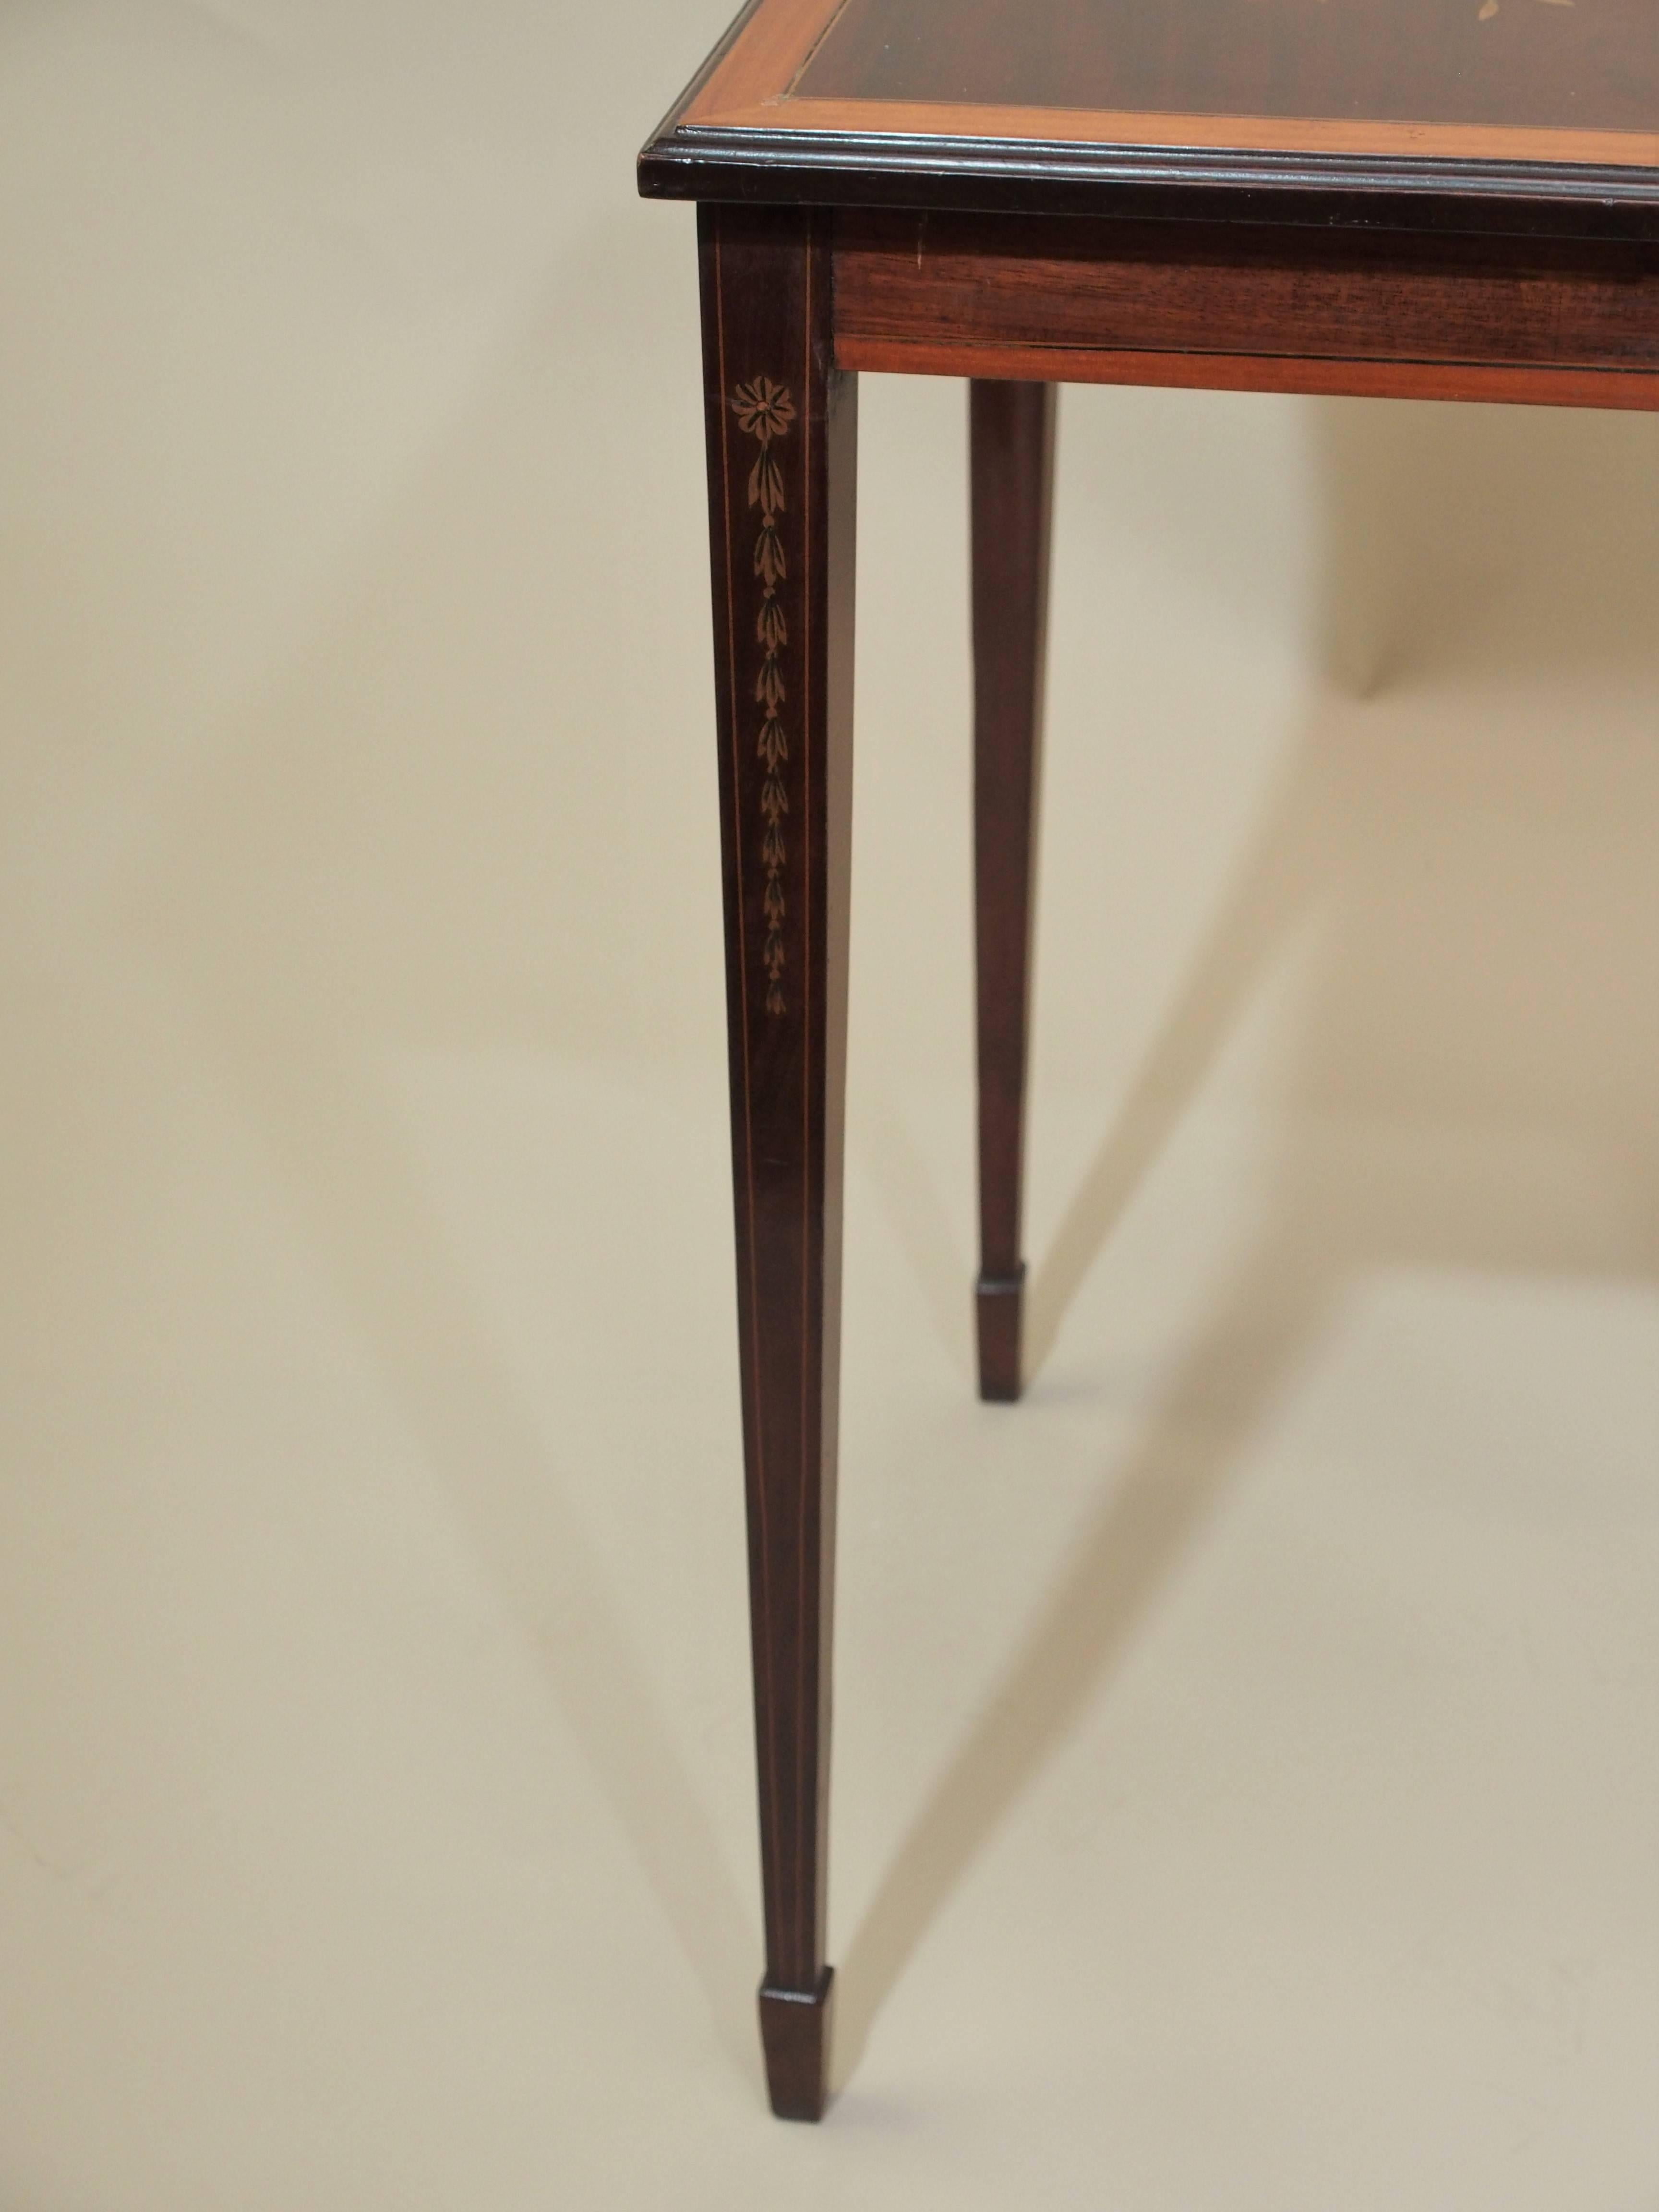 19th Century Antique English Mahogany Inlaid Edwardian Occasional Table, circa 1890 For Sale